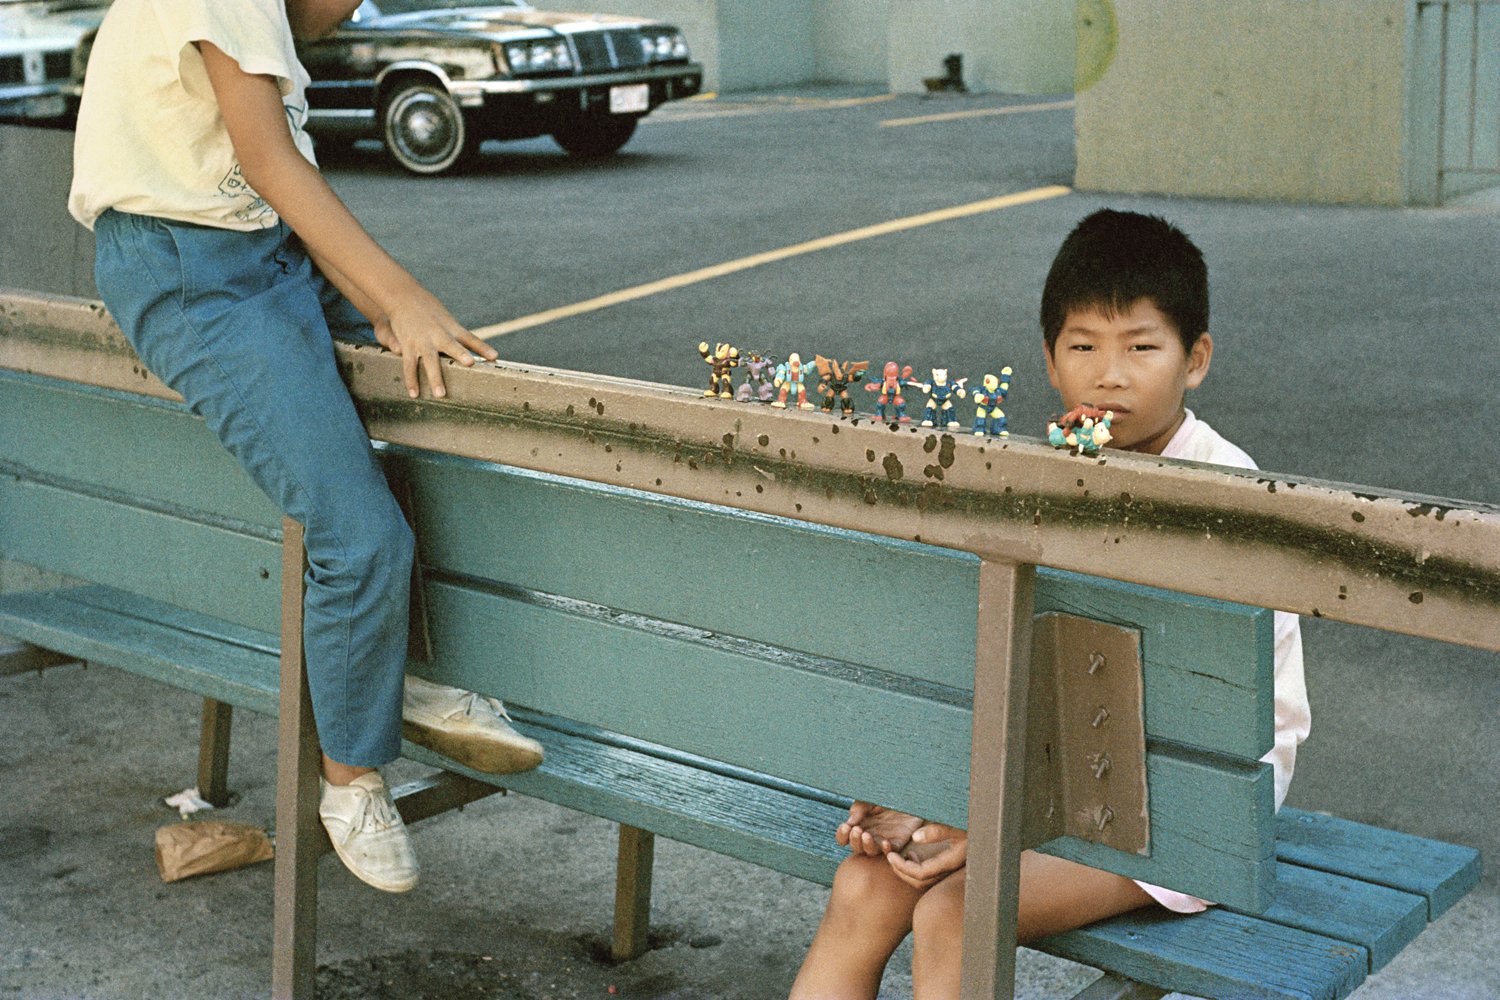 50 Boy With Action Figures, 1984.jpg